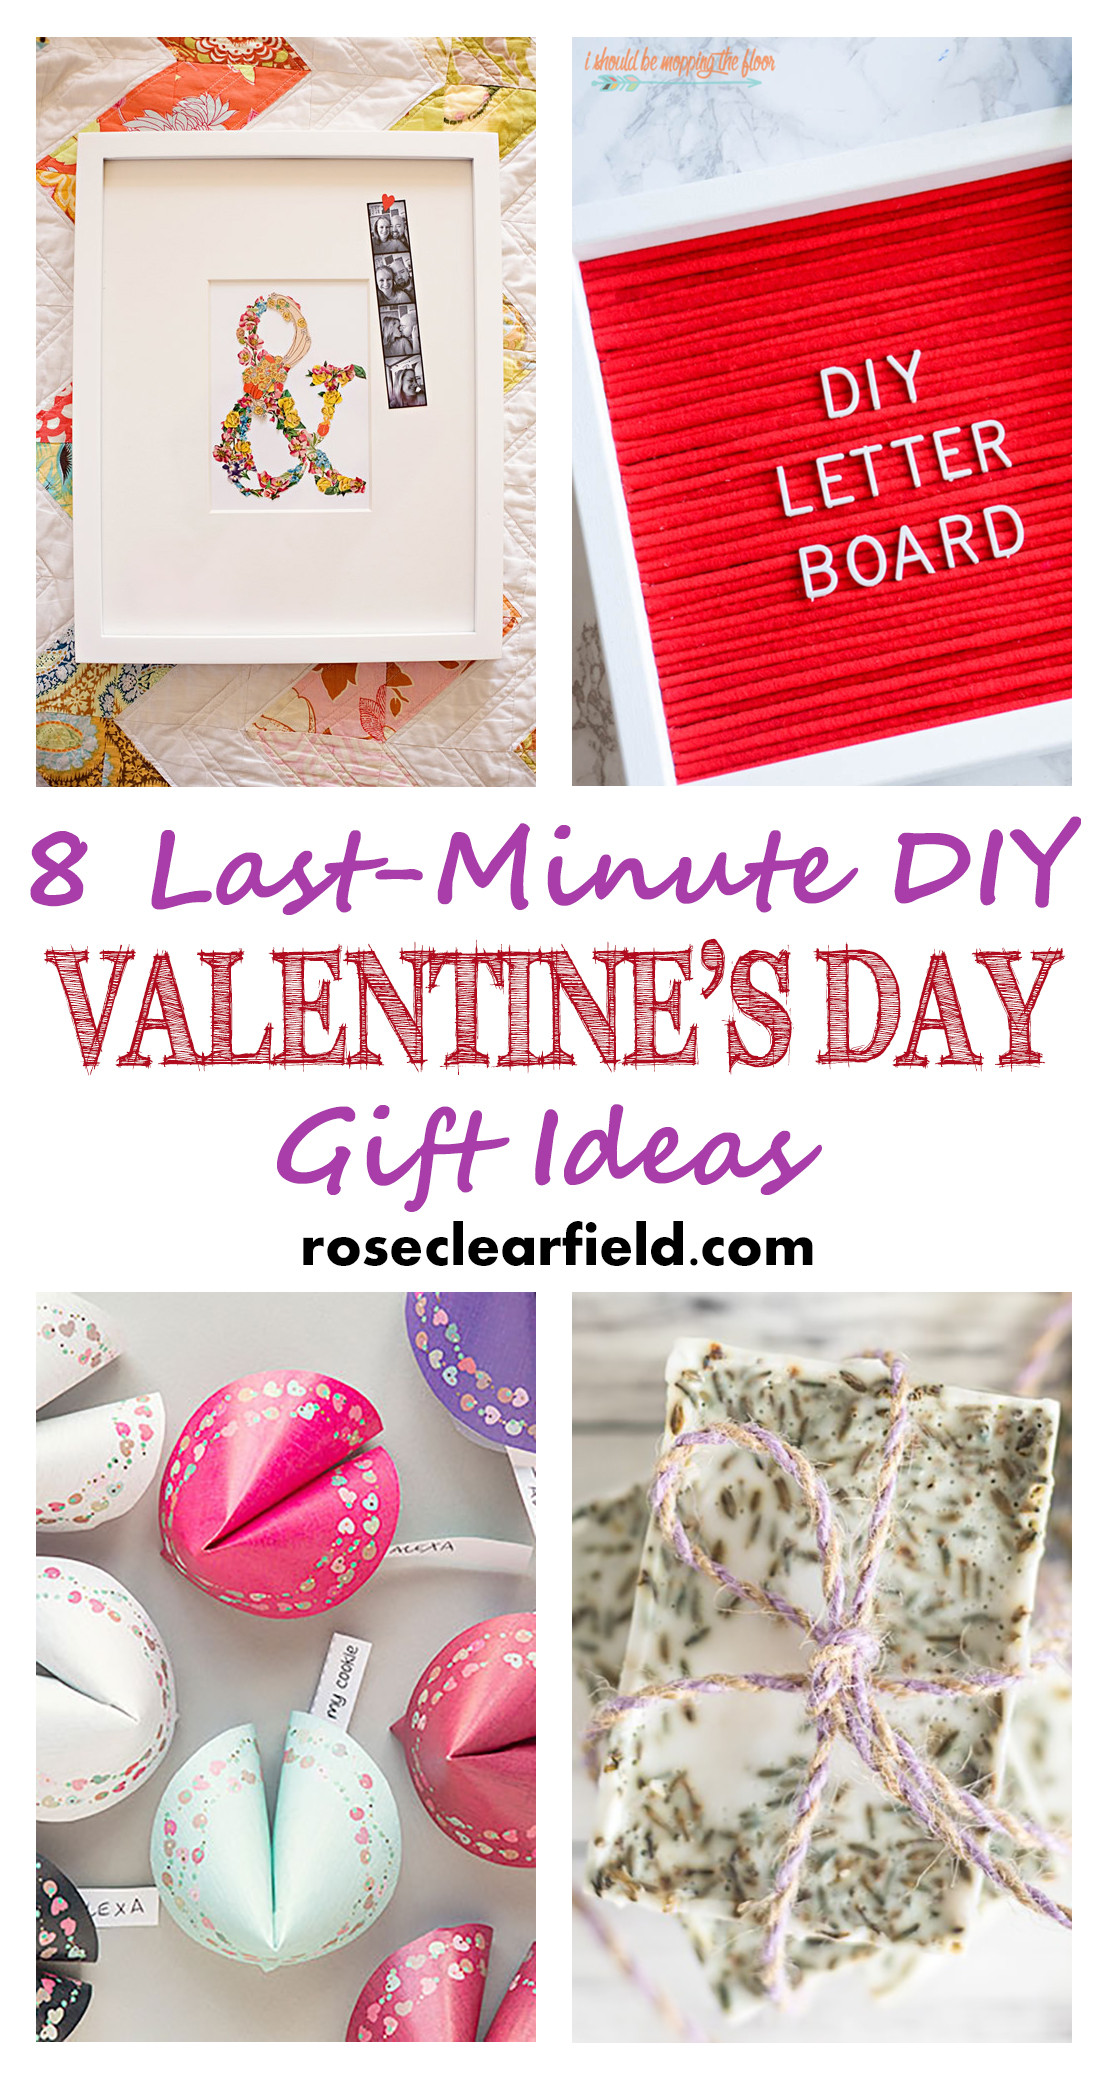 Valentines Day Gift Ideas Homemade
 Last Minute DIY Valentine s Day Gift Ideas • Rose Clearfield